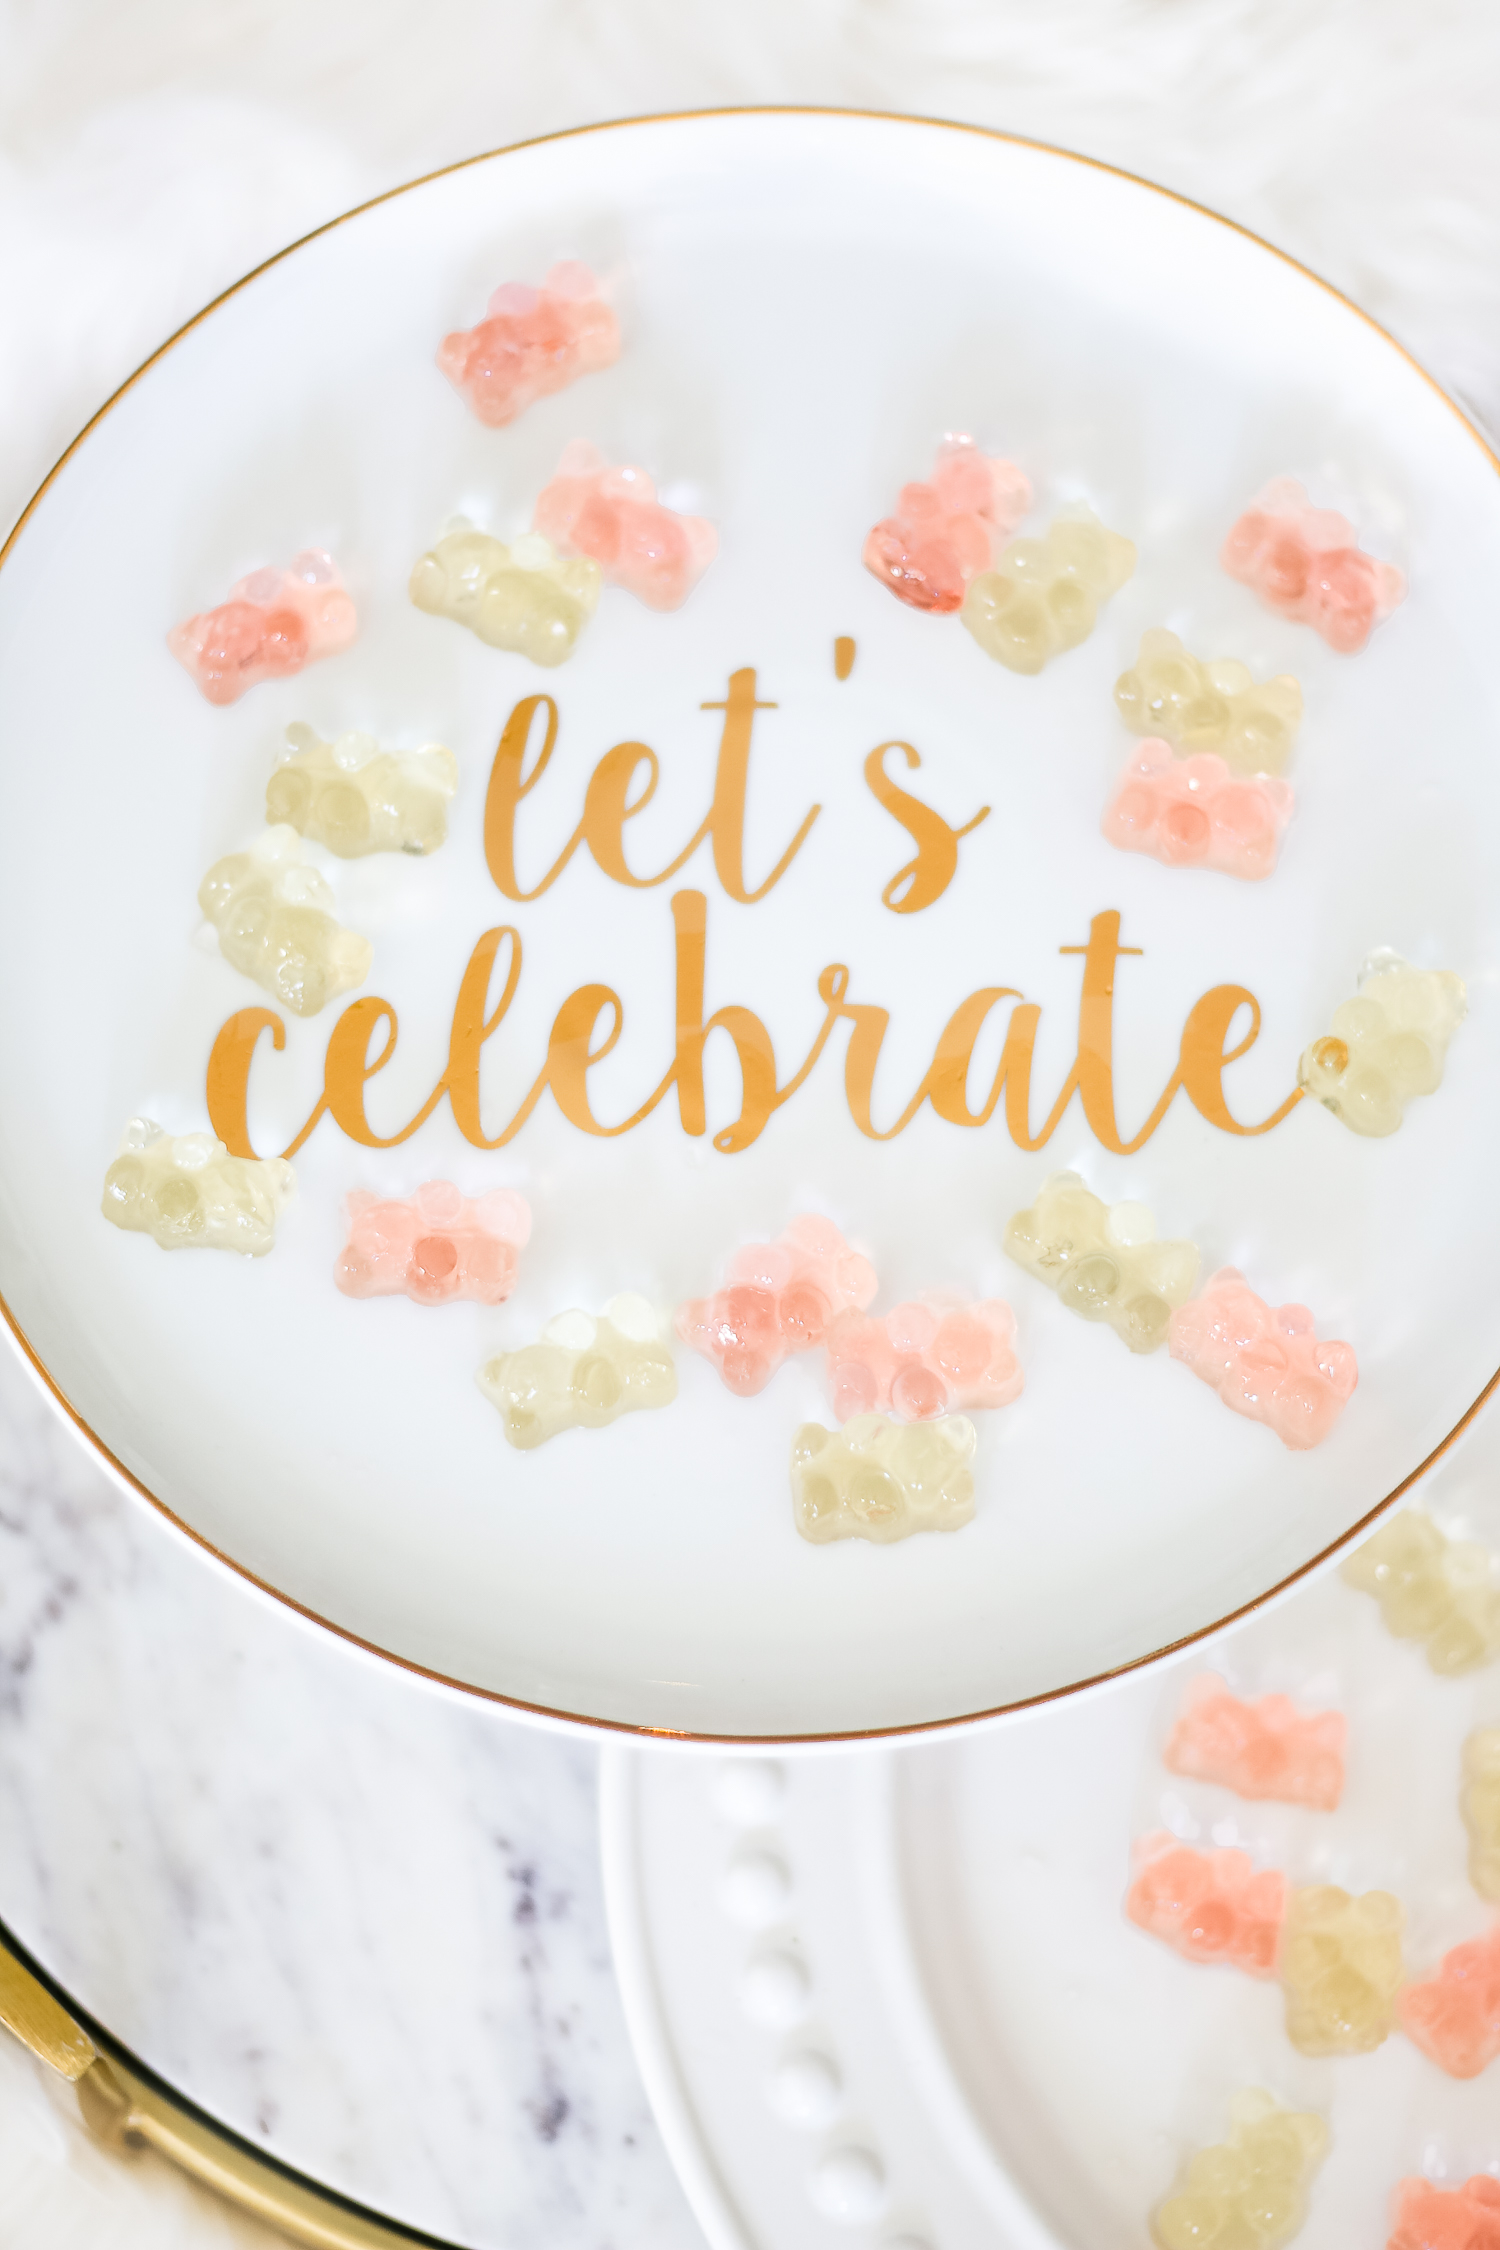 How to make champagne gummy bears by southern lifestyle blogger Stephanie Ziajka from Diary of a Debutante, easy champagne soaked gummy bears recipe using Sugarfina Champagne Bears Gummy Candy, ceramic Let's Celebrate cake stand